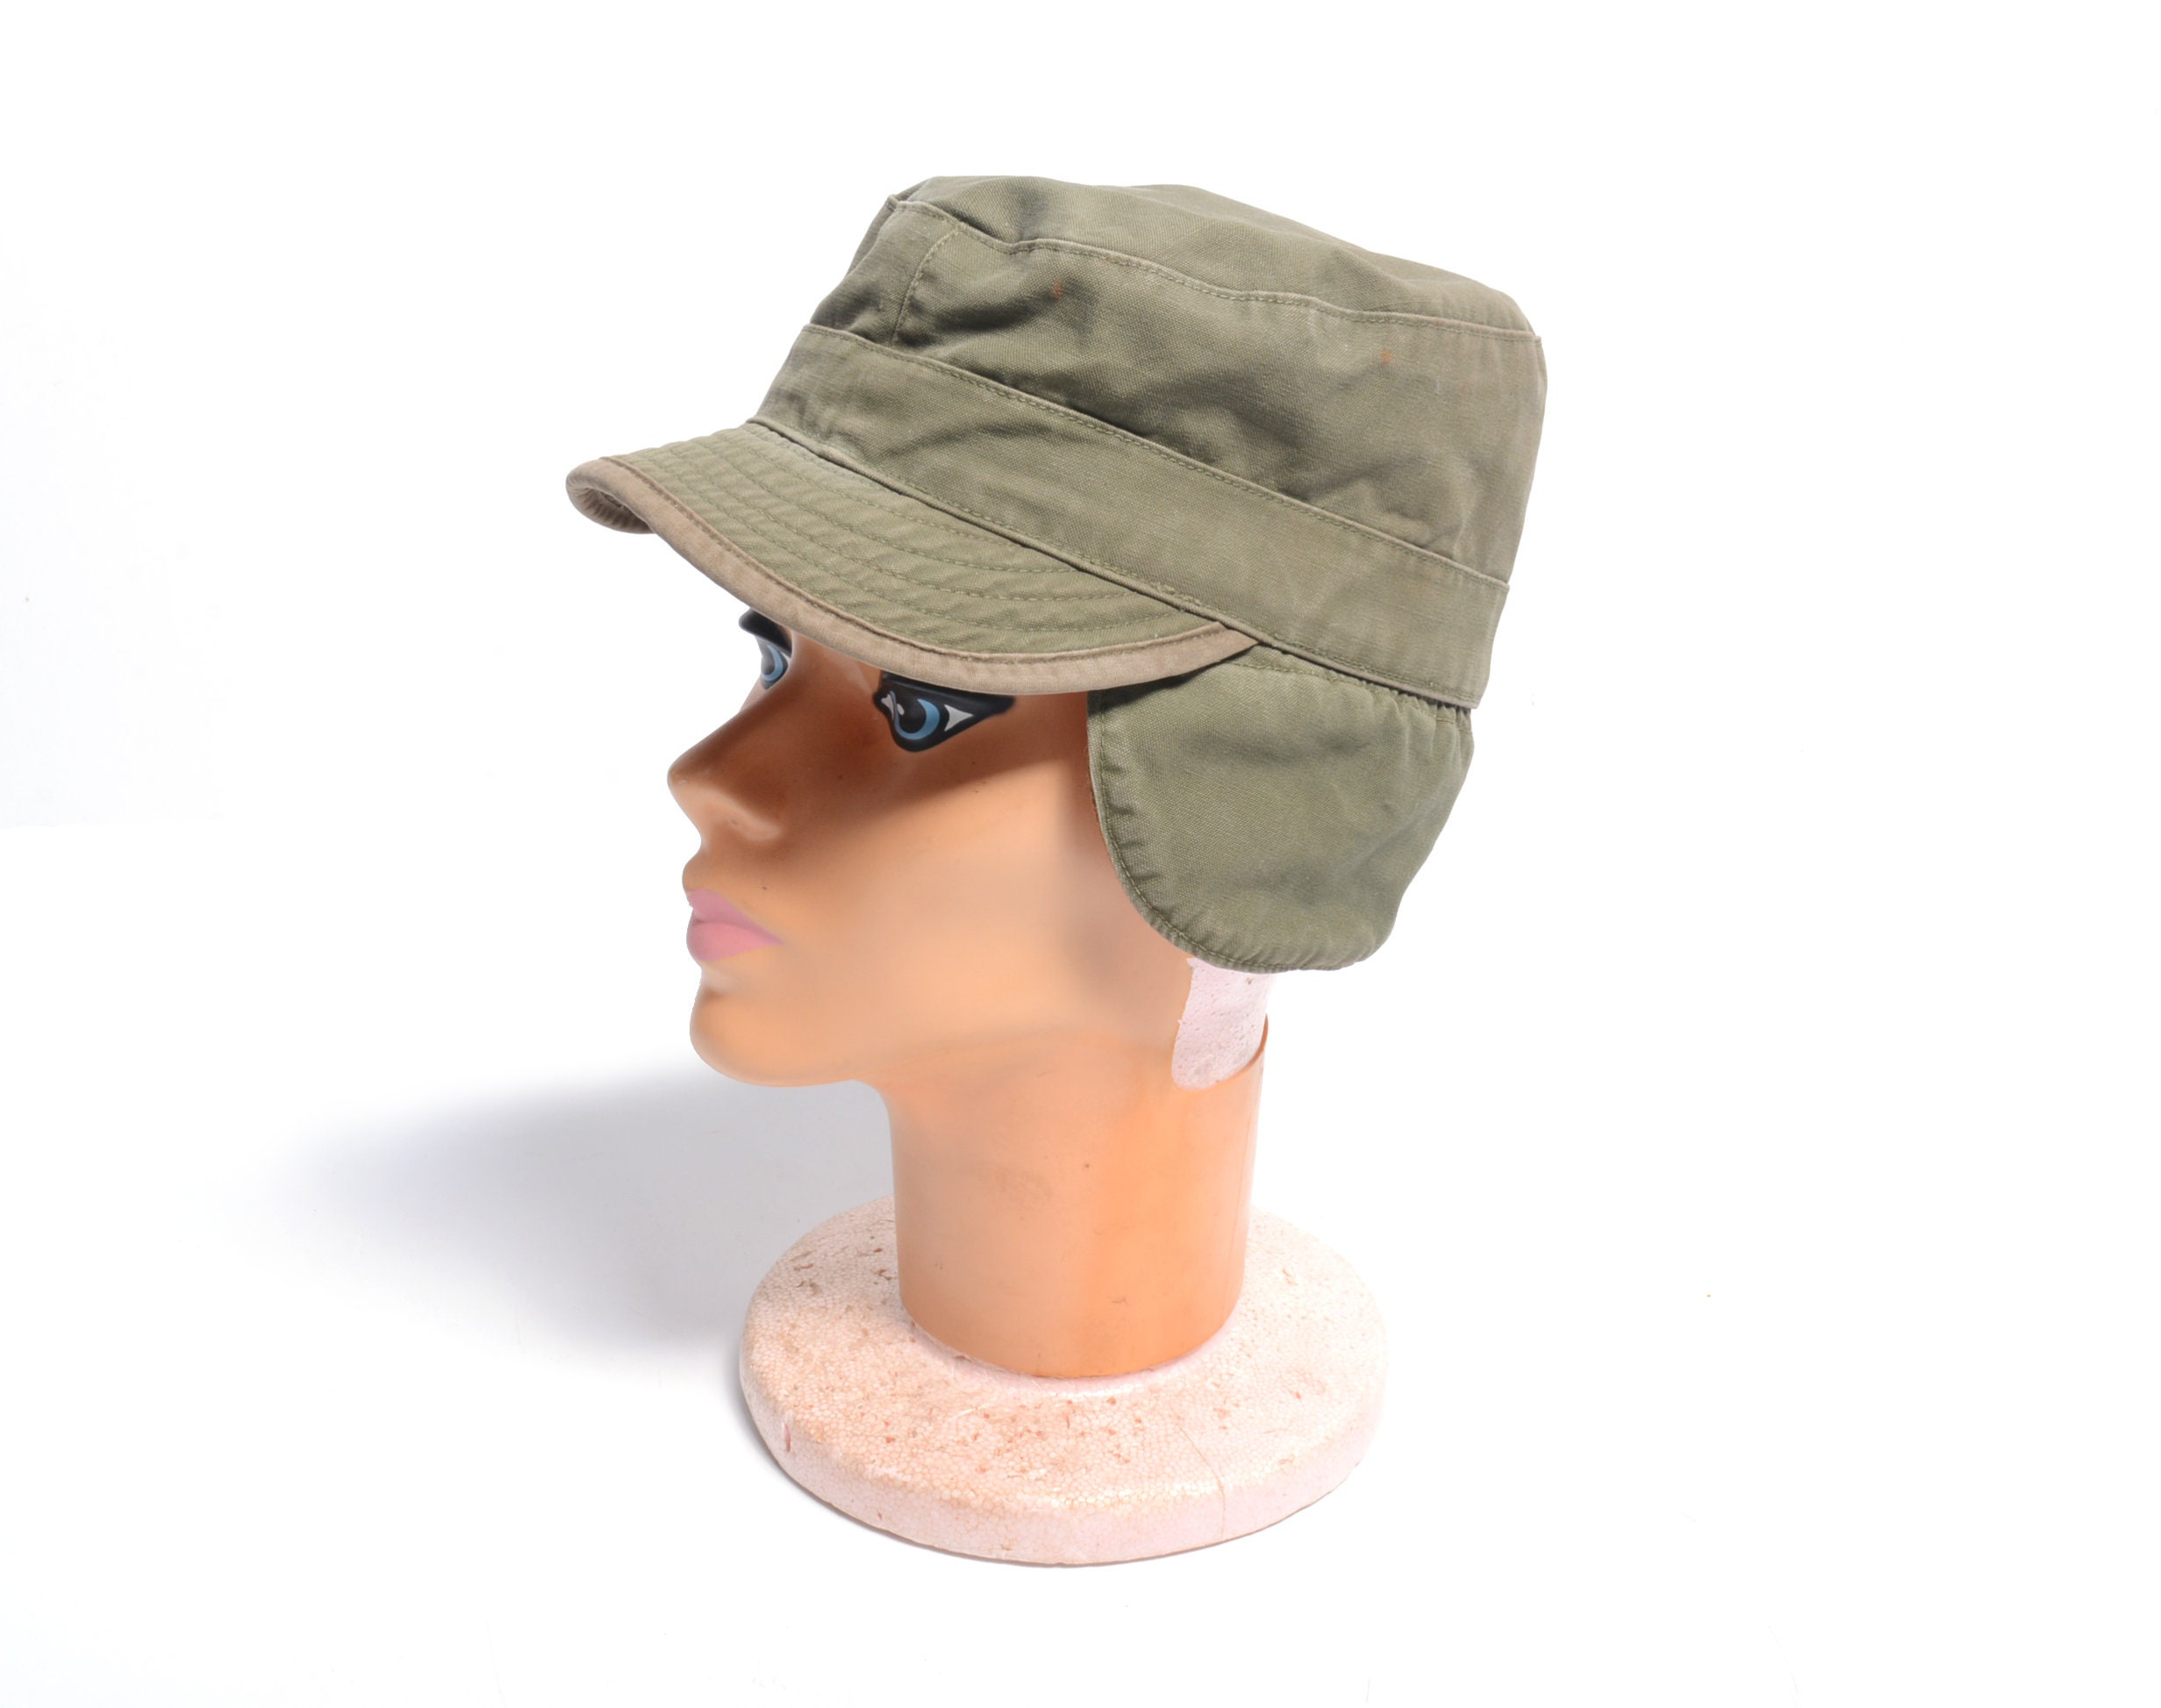 Vintage 50s Army Cap Ear Flap Hat Drab Olive Green - Etsy